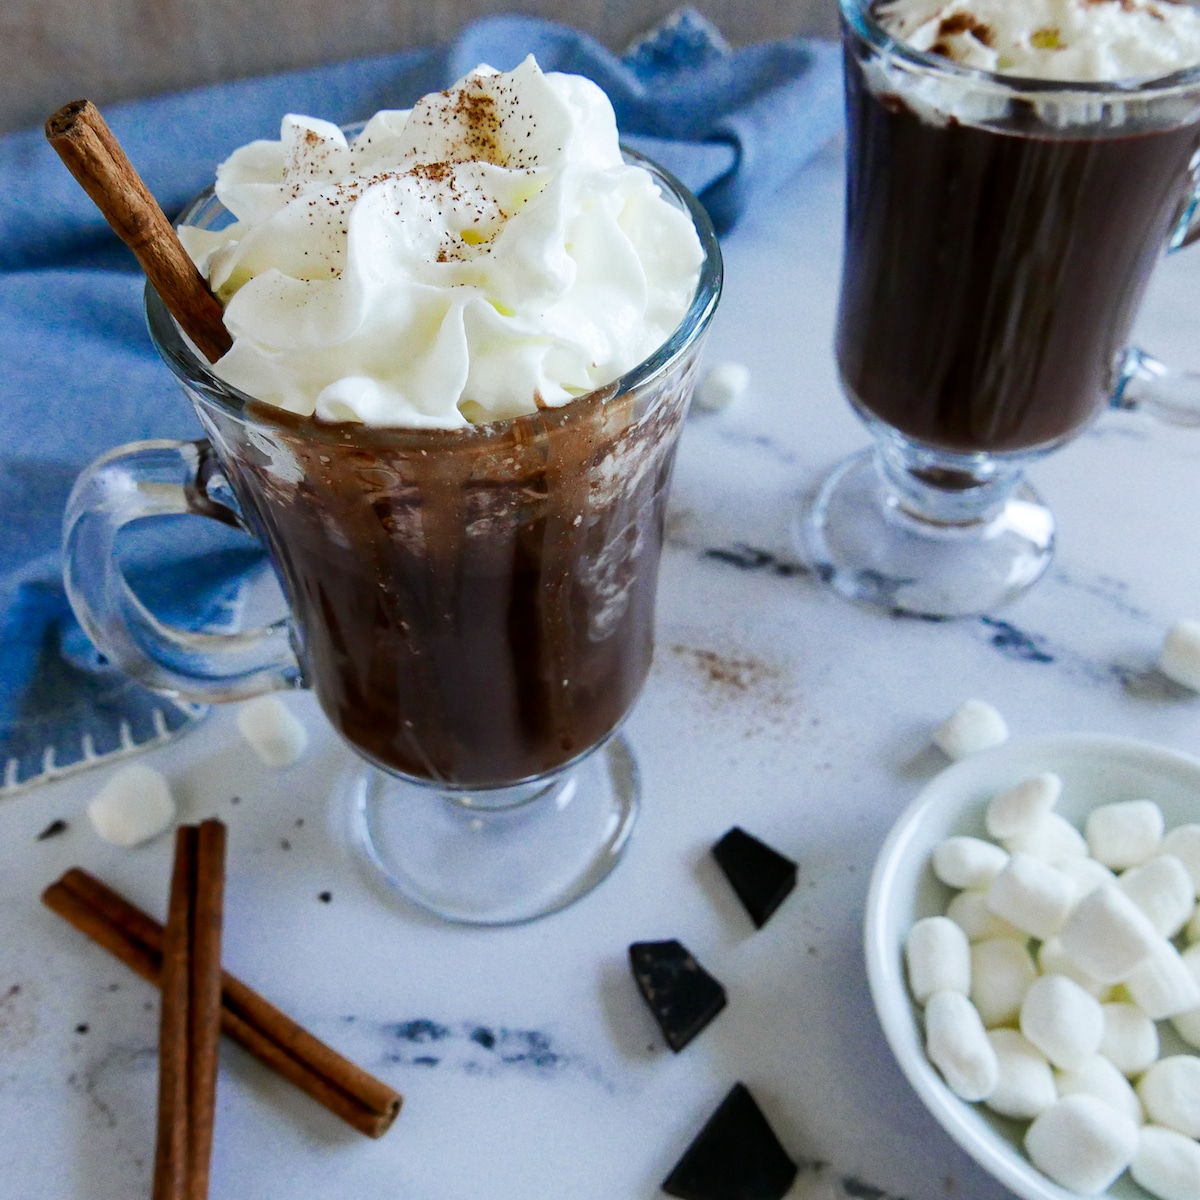 two mugs of oat milk hot chocolate garnished with whipped cream and a cinnamon stick.